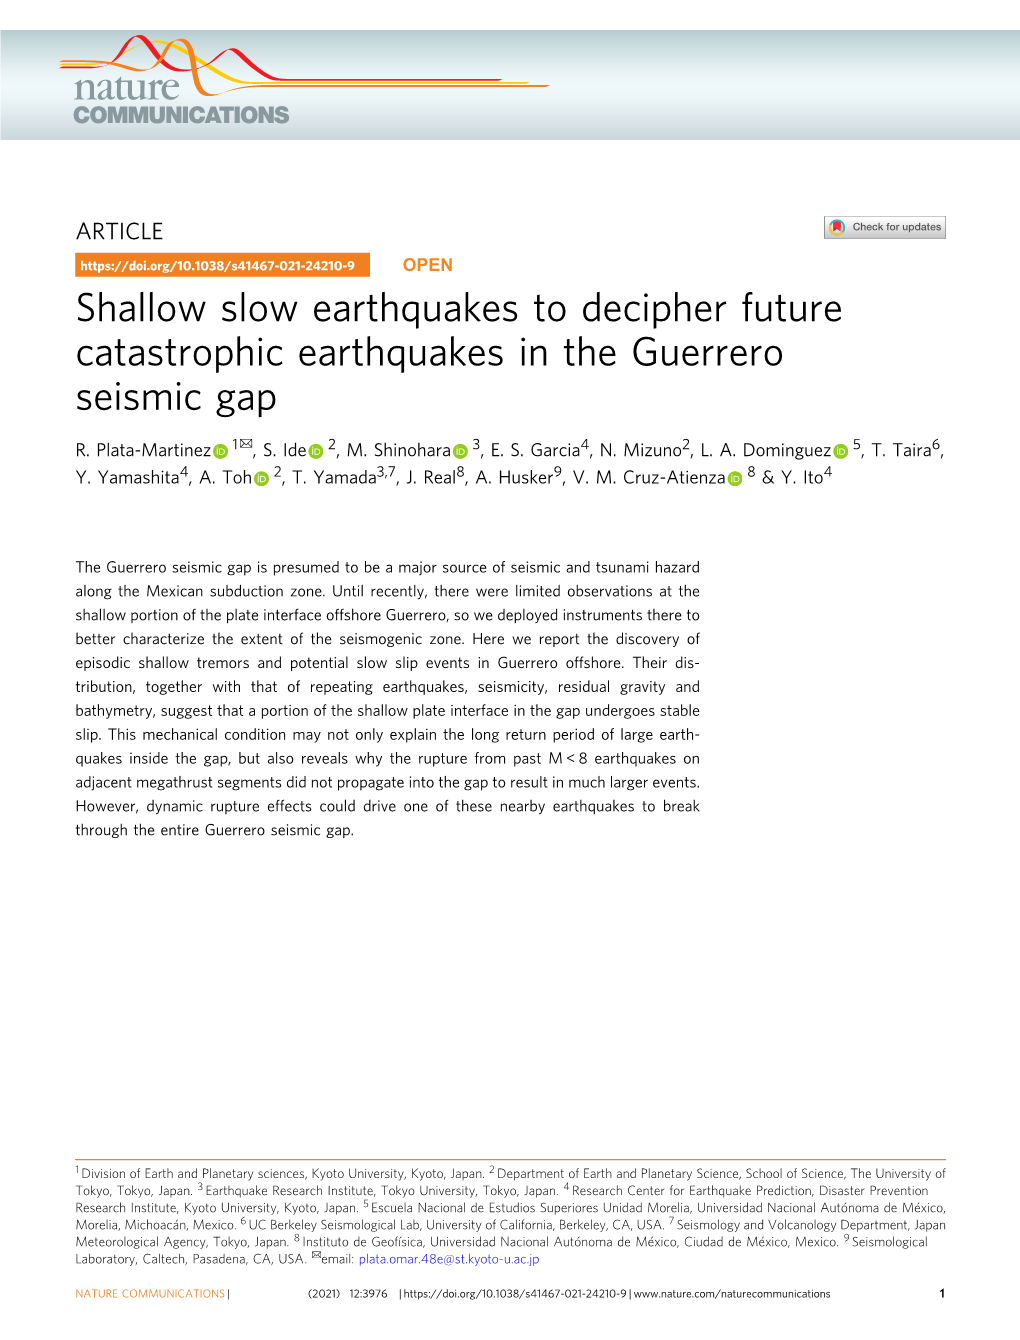 Shallow Slow Earthquakes to Decipher Future Catastrophic Earthquakes in the Guerrero Seismic Gap ✉ R